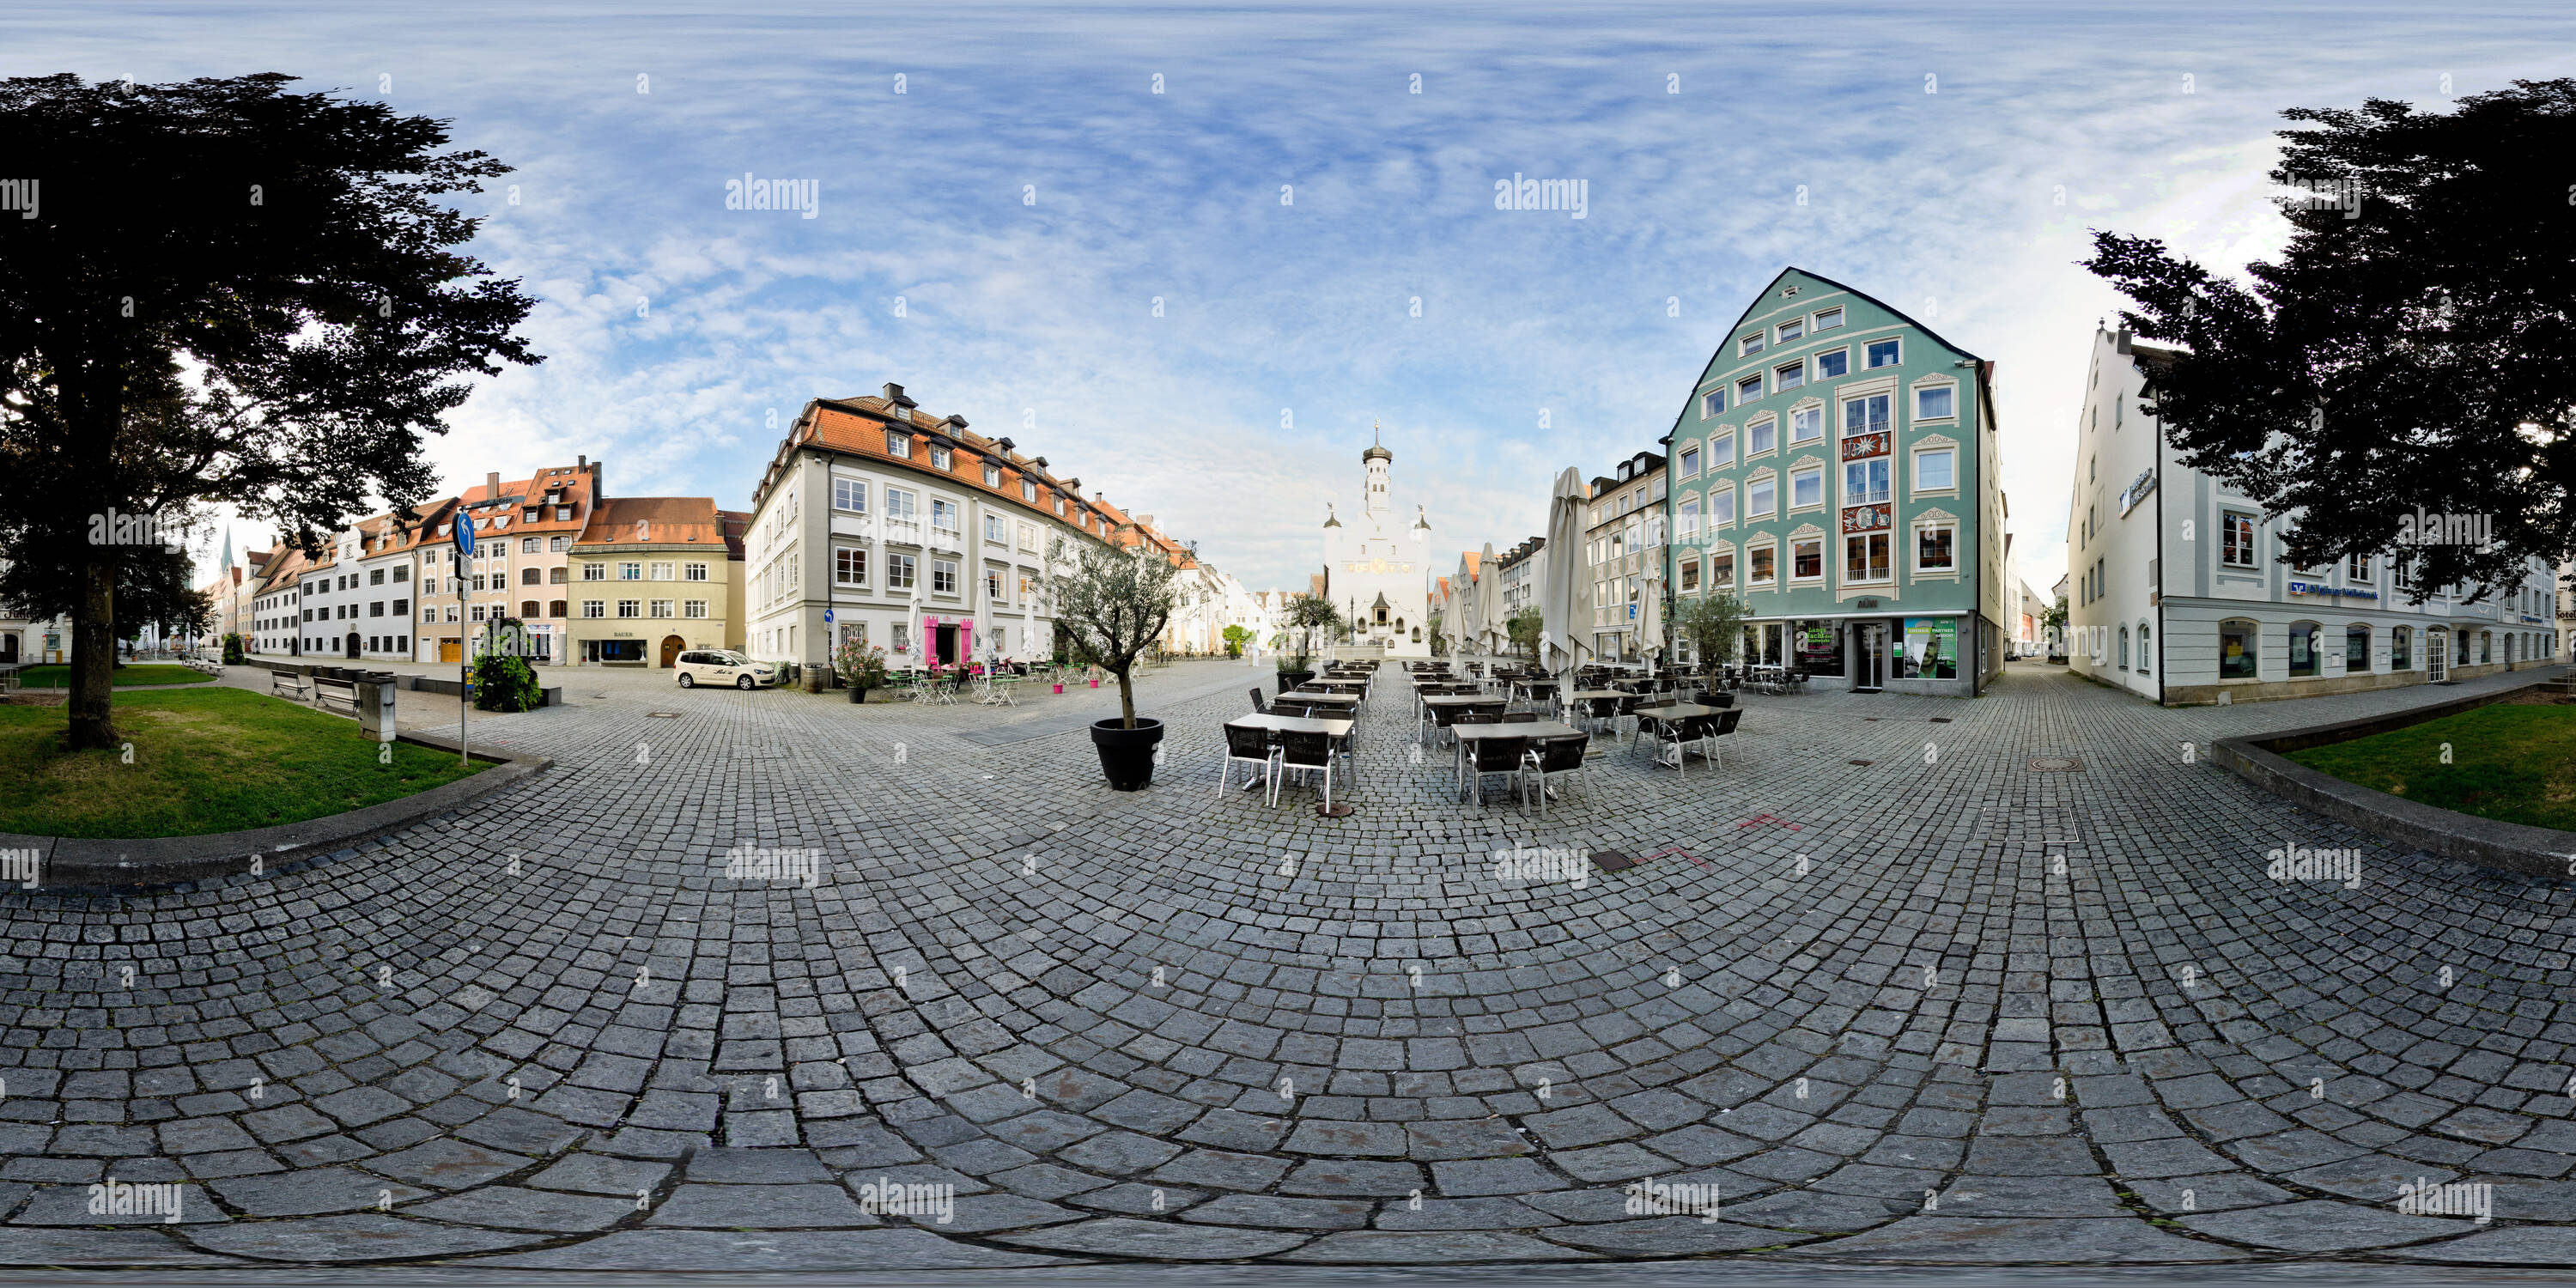 360 degree panoramic view of Market Square, City Hall, Kempten 2017 07